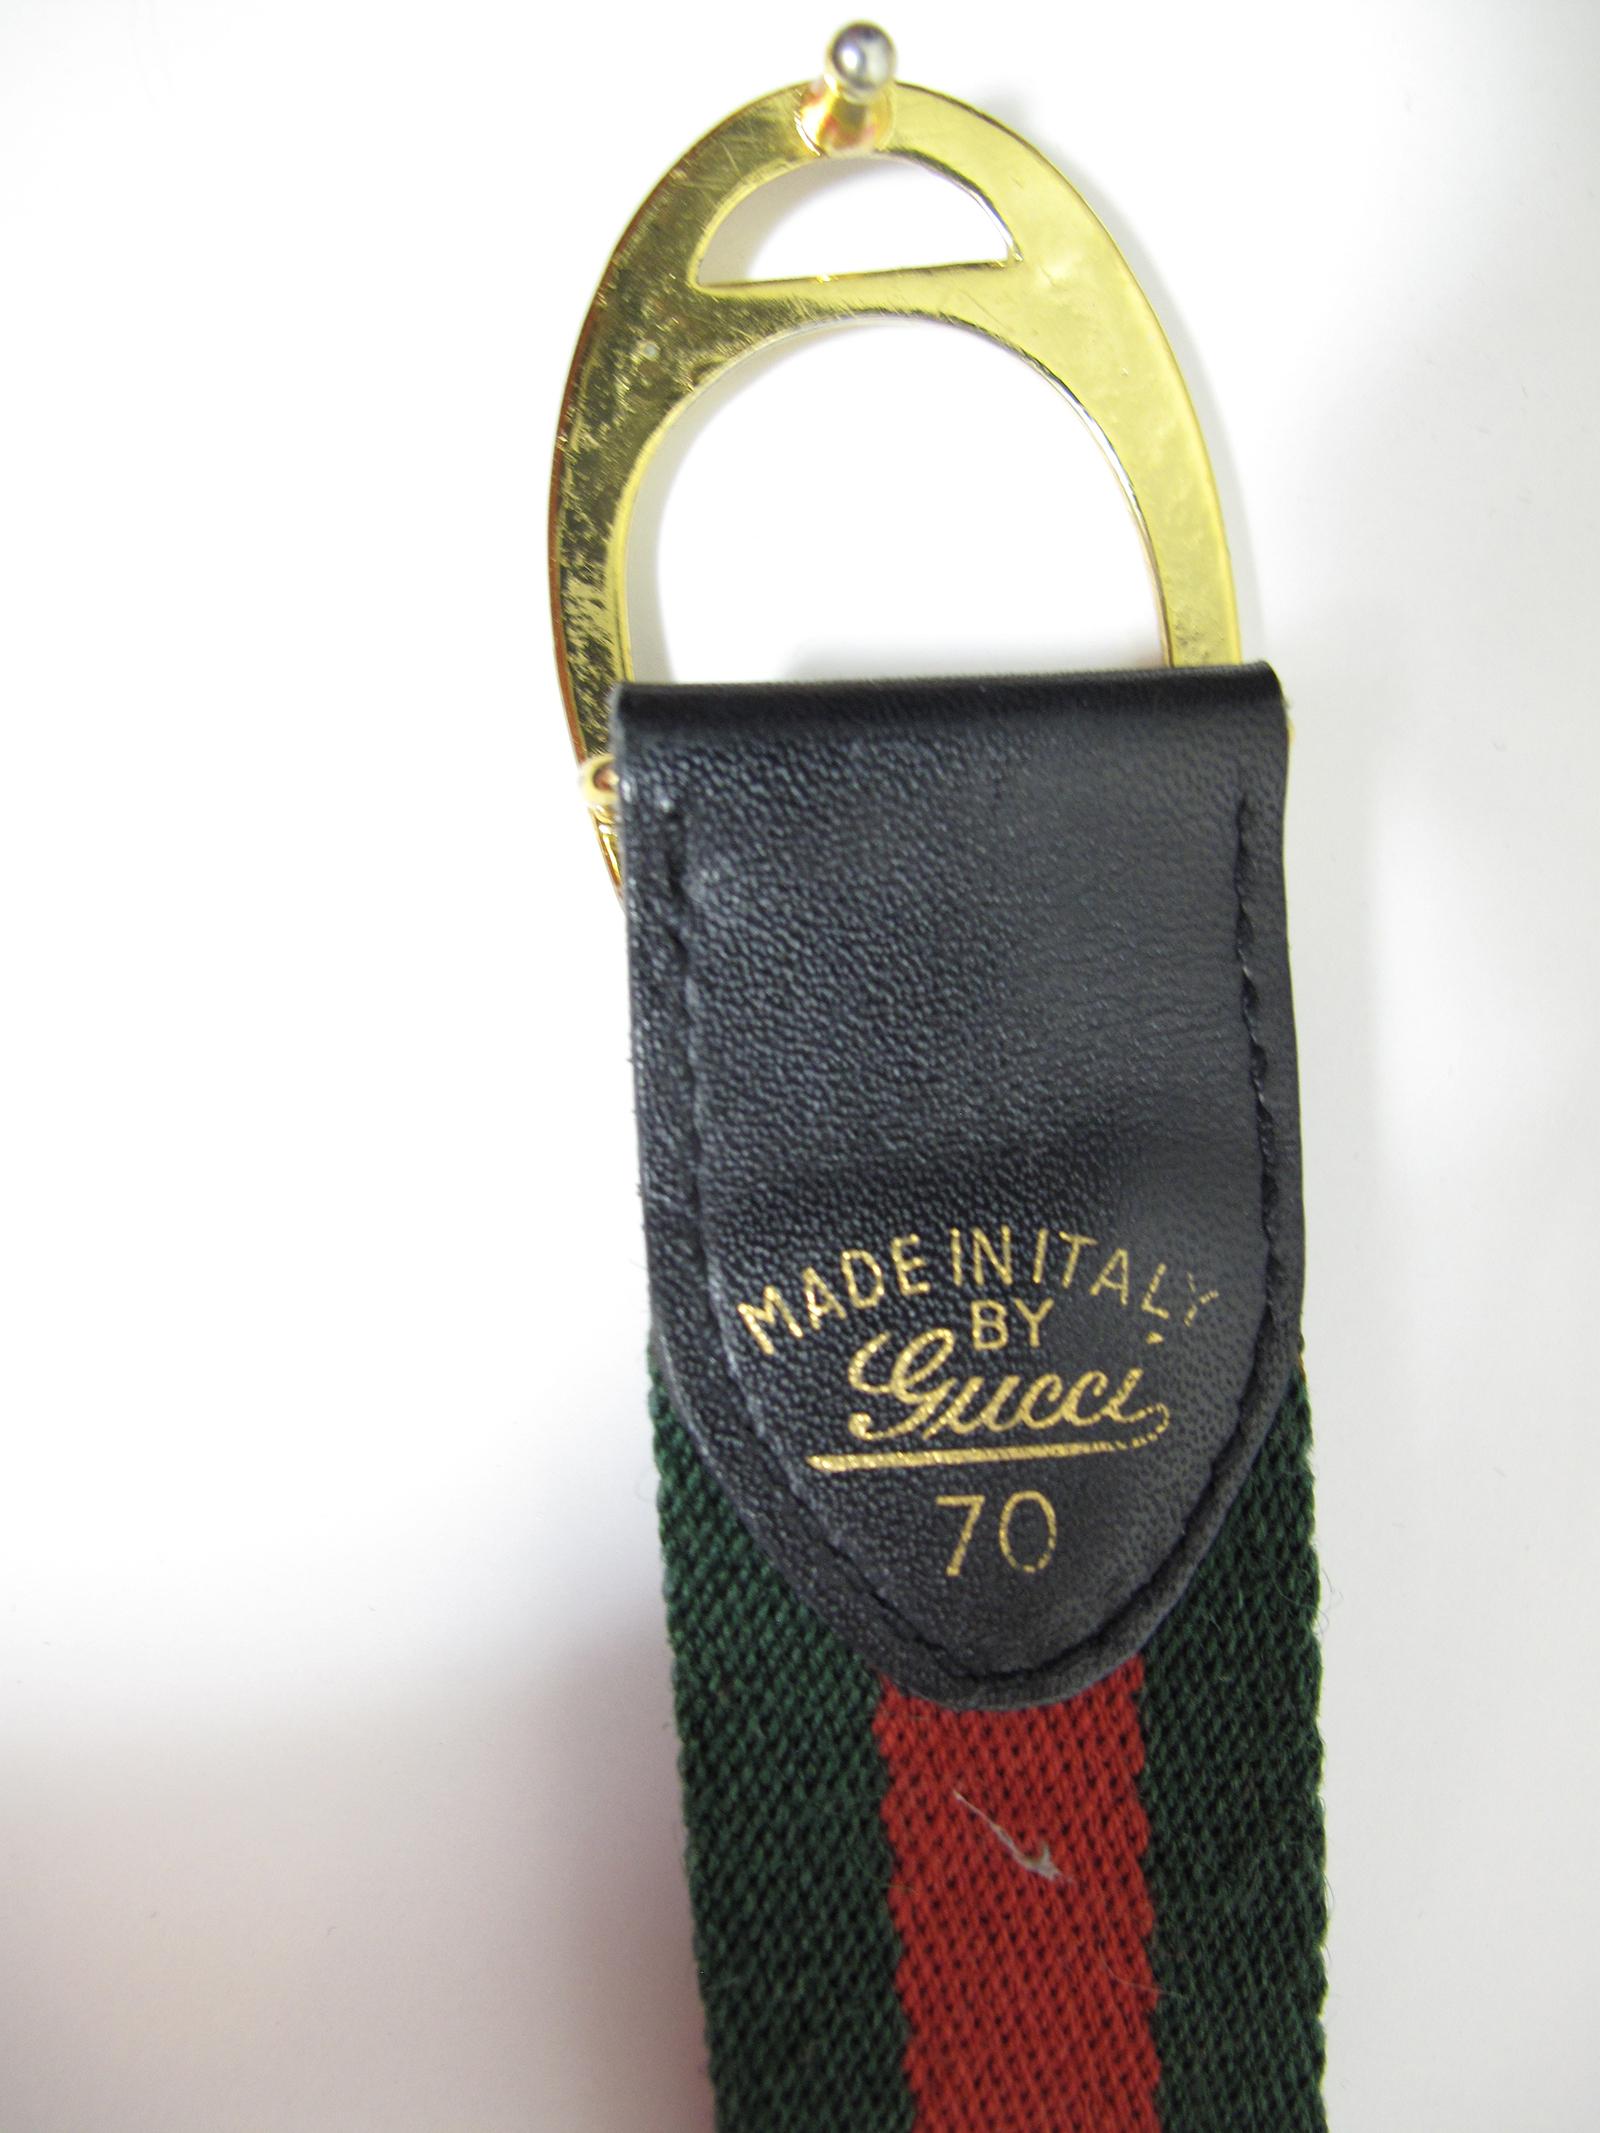 Gucci red and green striped belt.  Condition: Excellent. Stamped Gucci made in Italy. Fits 26 1/2